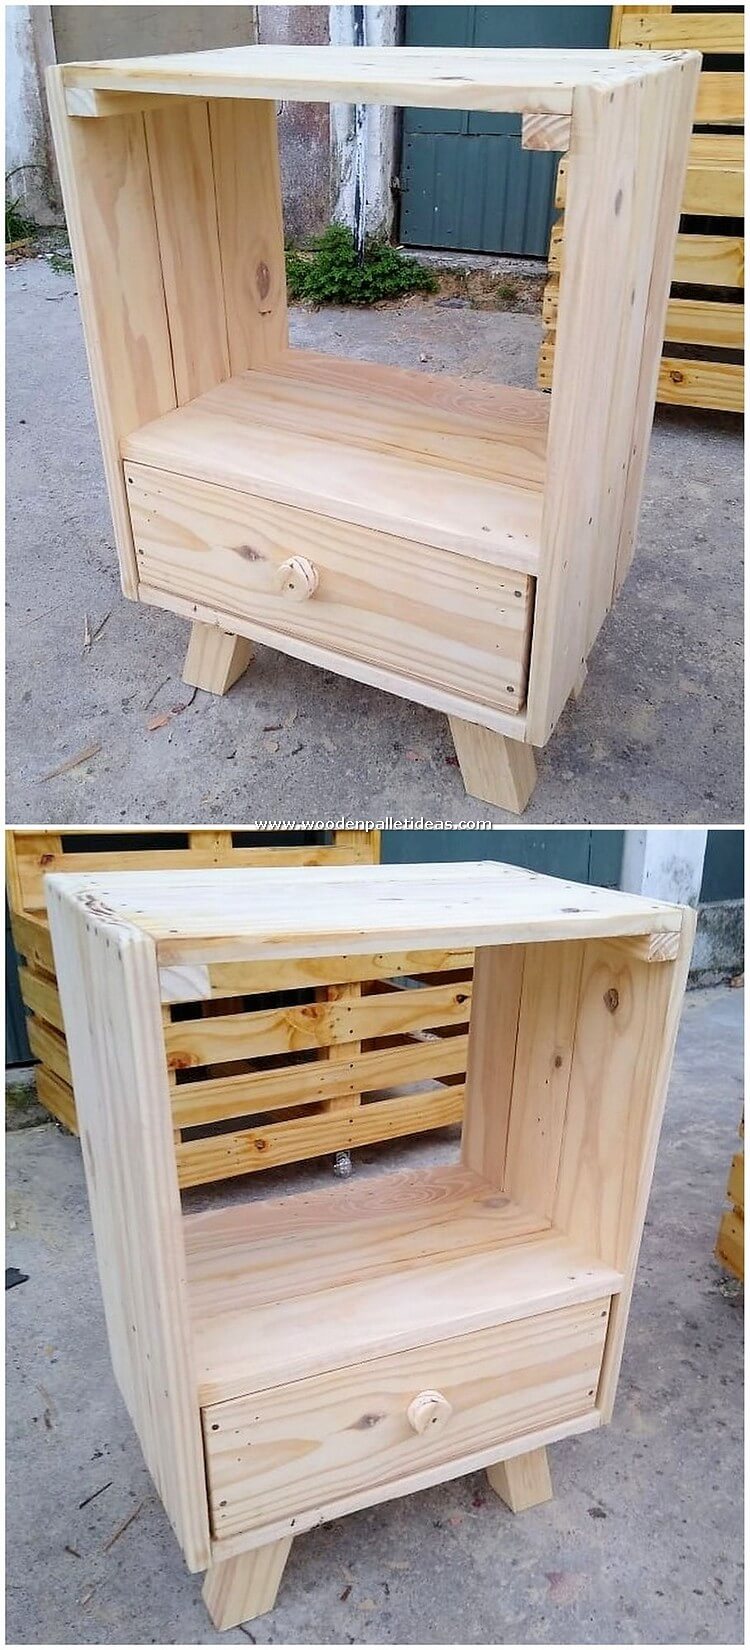 Pallet-Side-Table-with-Drawer